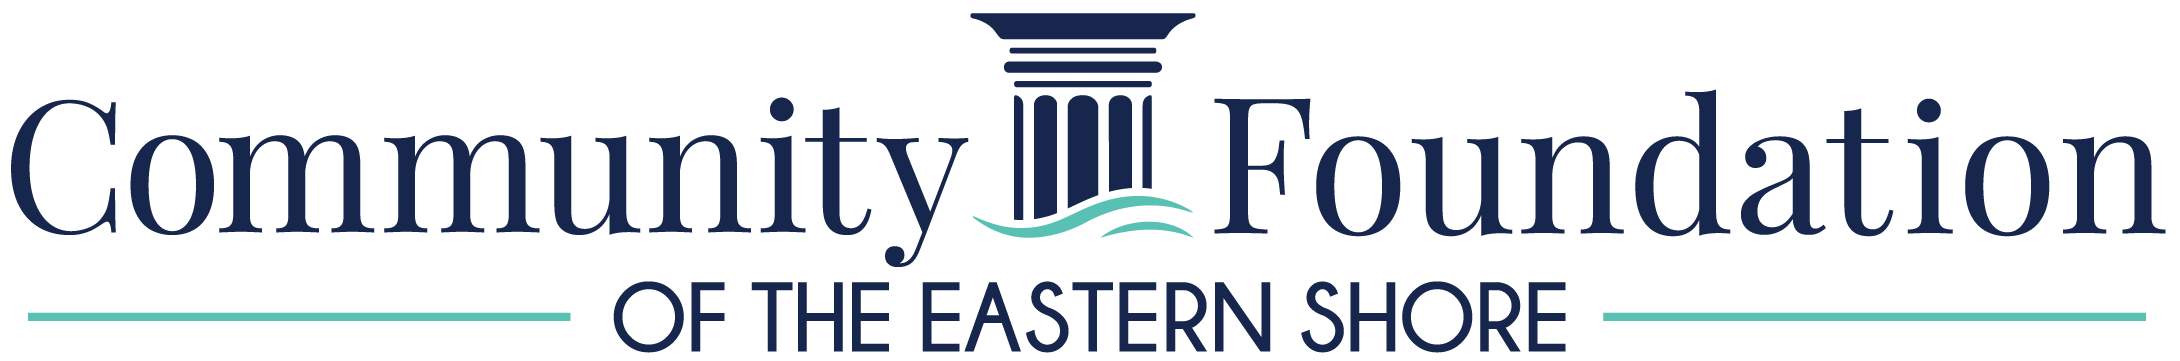 External Link to Community Foundation of the Eastern Shore's Website